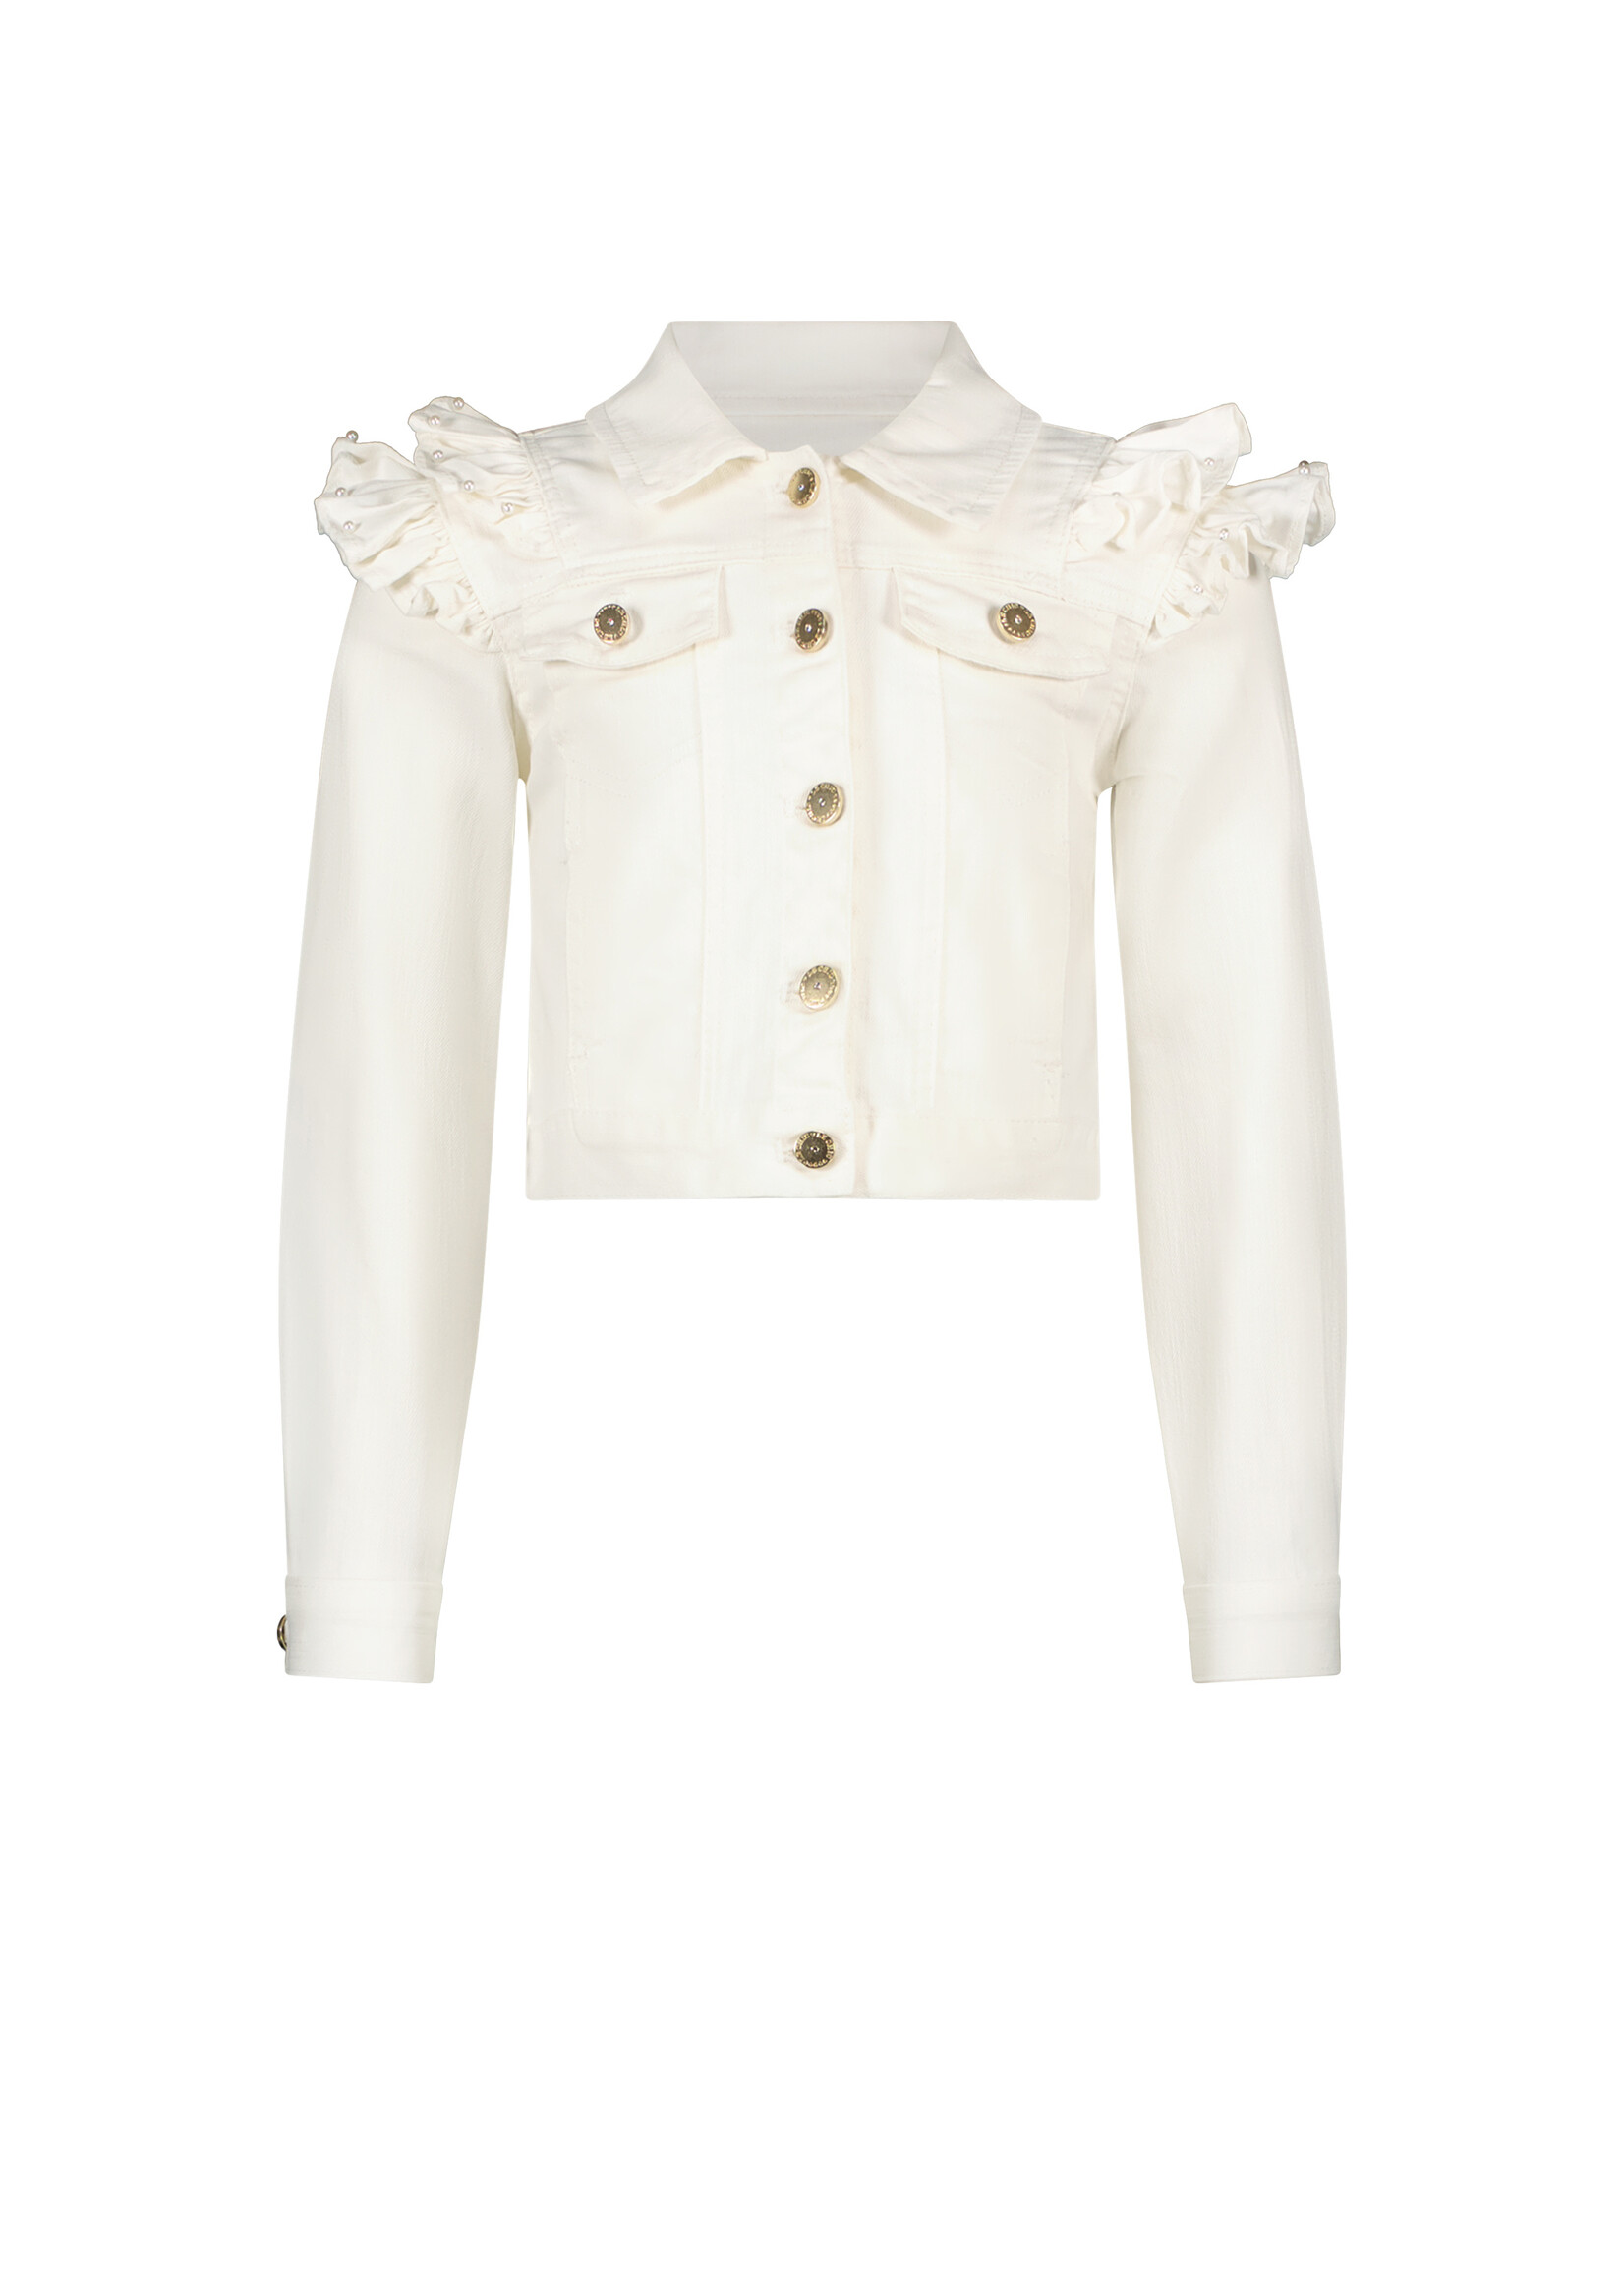 Le Chic Girls Kids C312-5180 ALLY ruffles at armhole jacket Off White